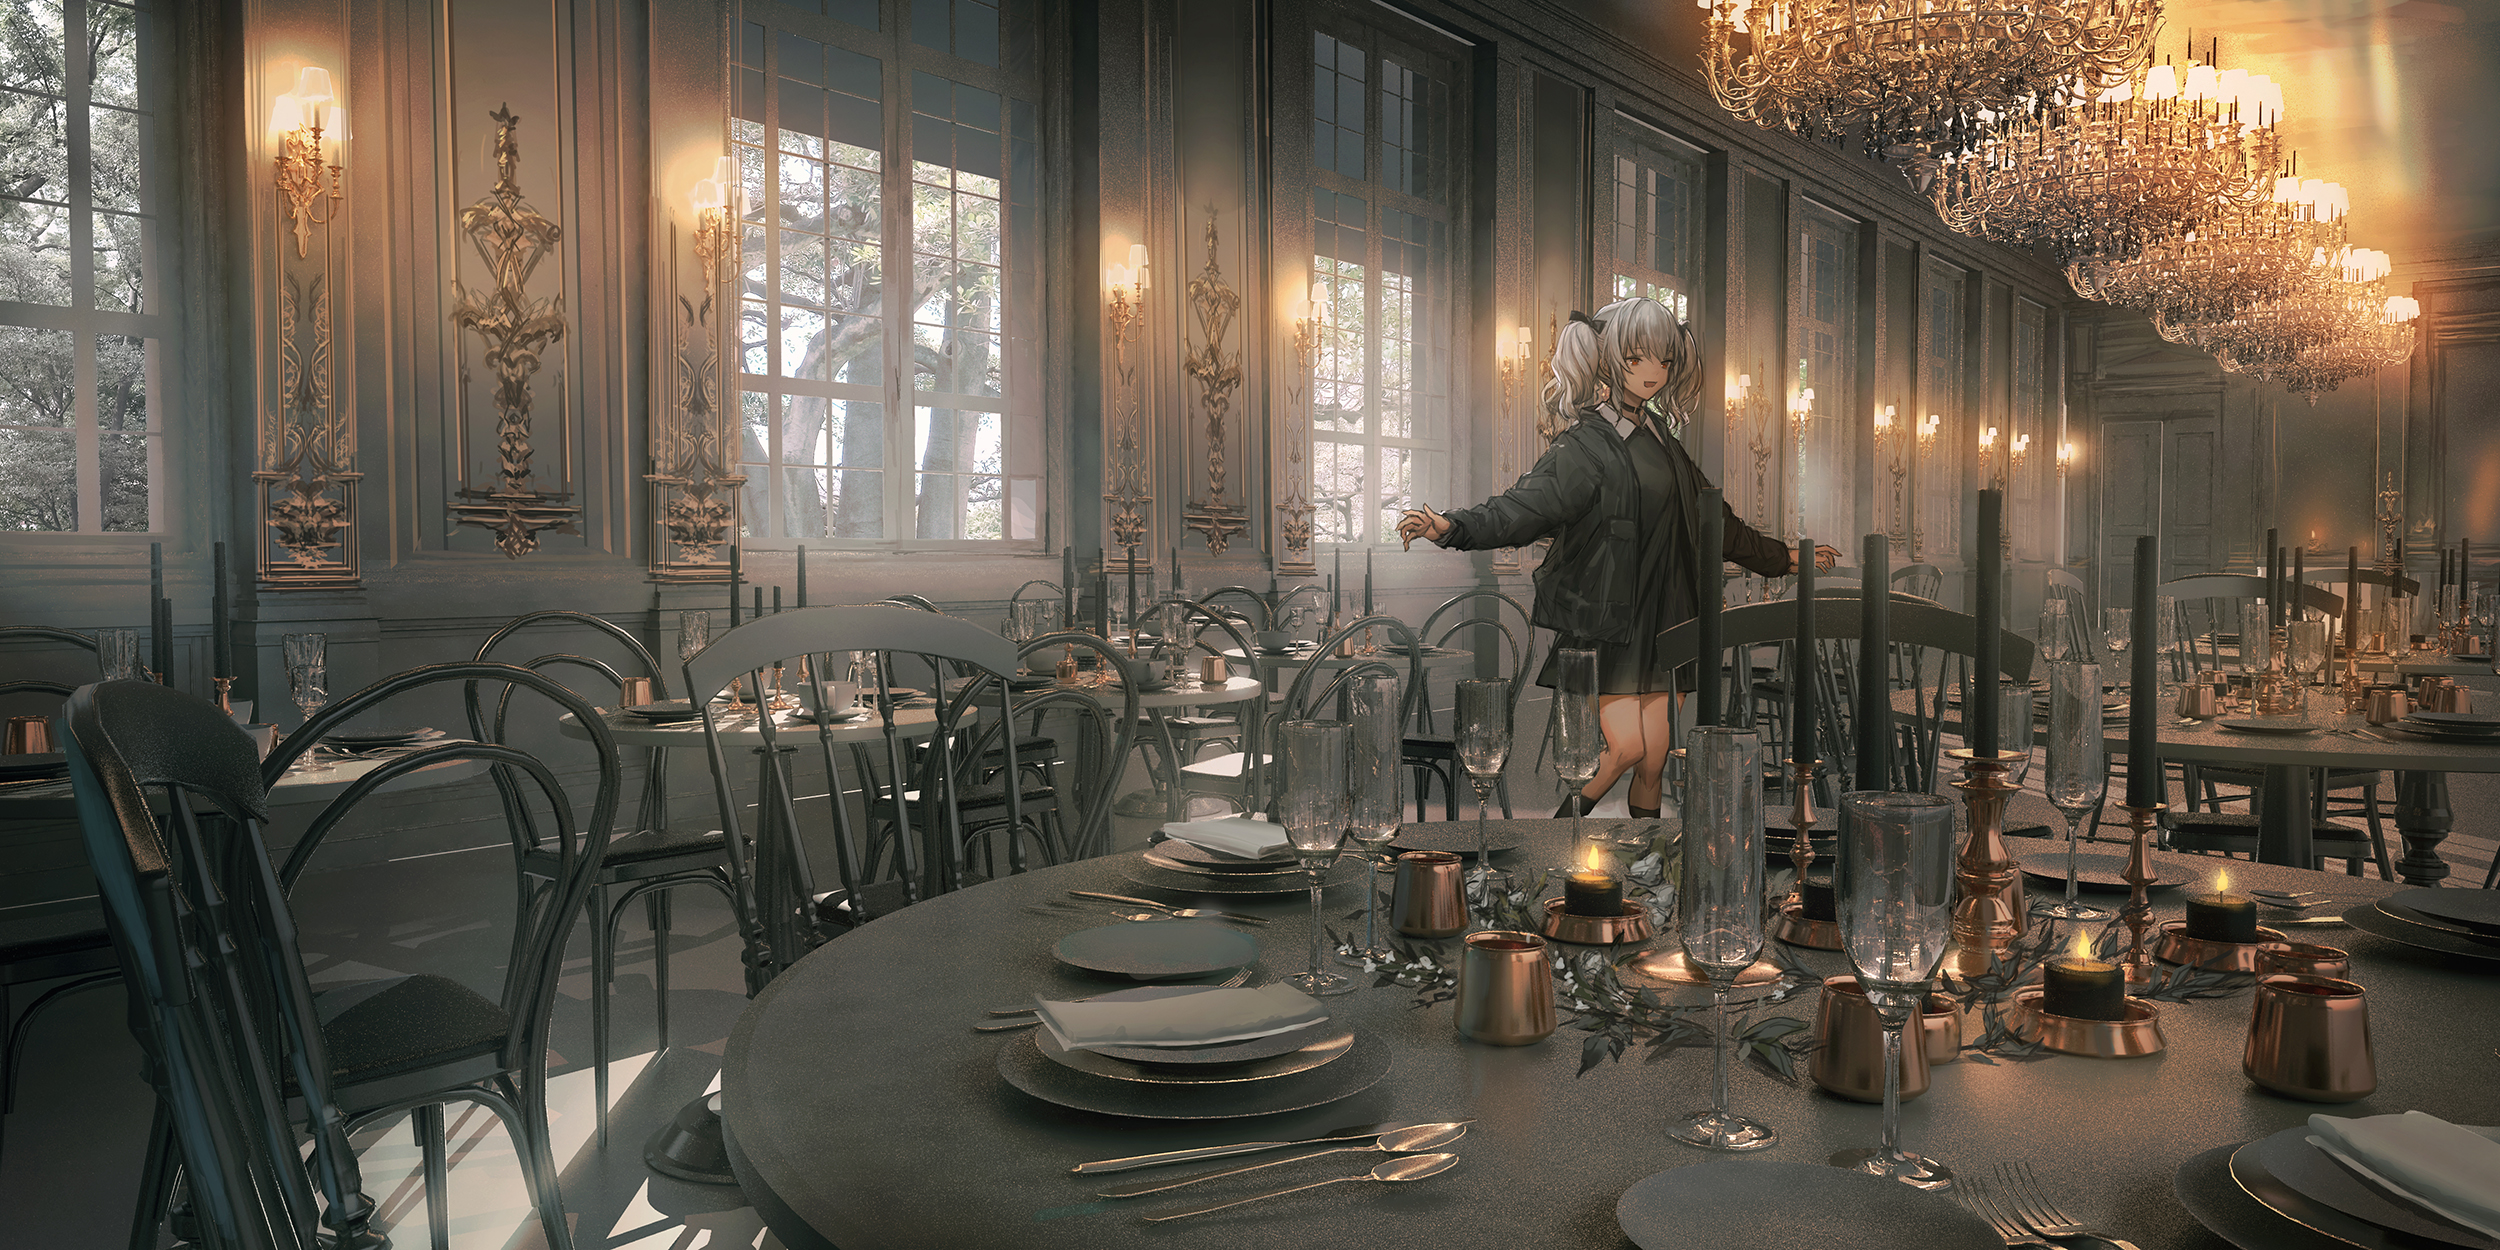 Anime Anime Girls Ponytail Chandeliers Candles Chair Spoons Fork LM7 2500x1250